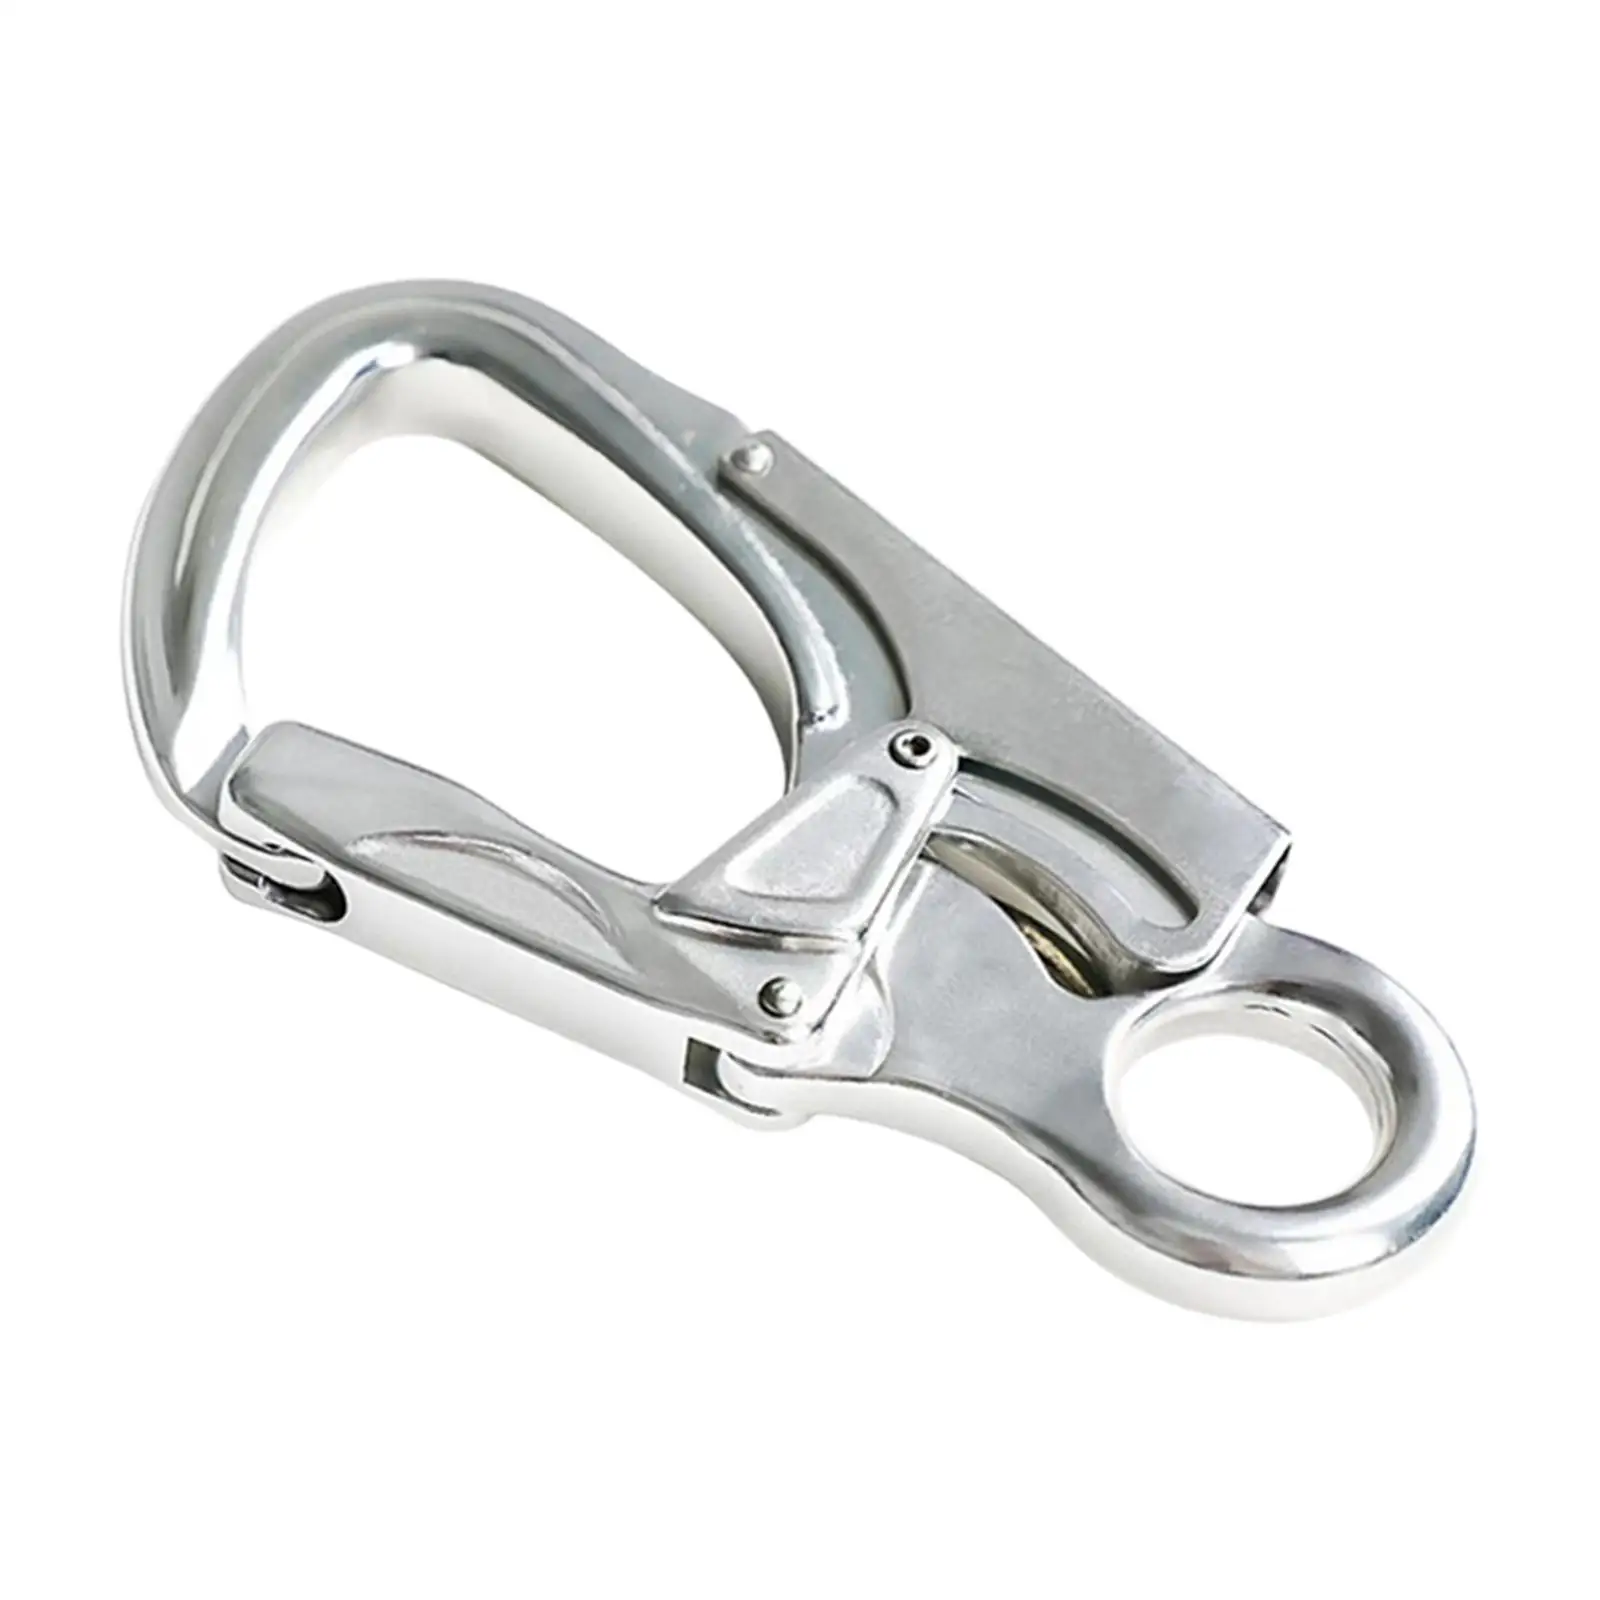 Double Locking Snap Hook Aluminum Alloy Keychain Versatile Usage Carabiner Clip for Hiking Swing Rappelling Climbing Outdoor